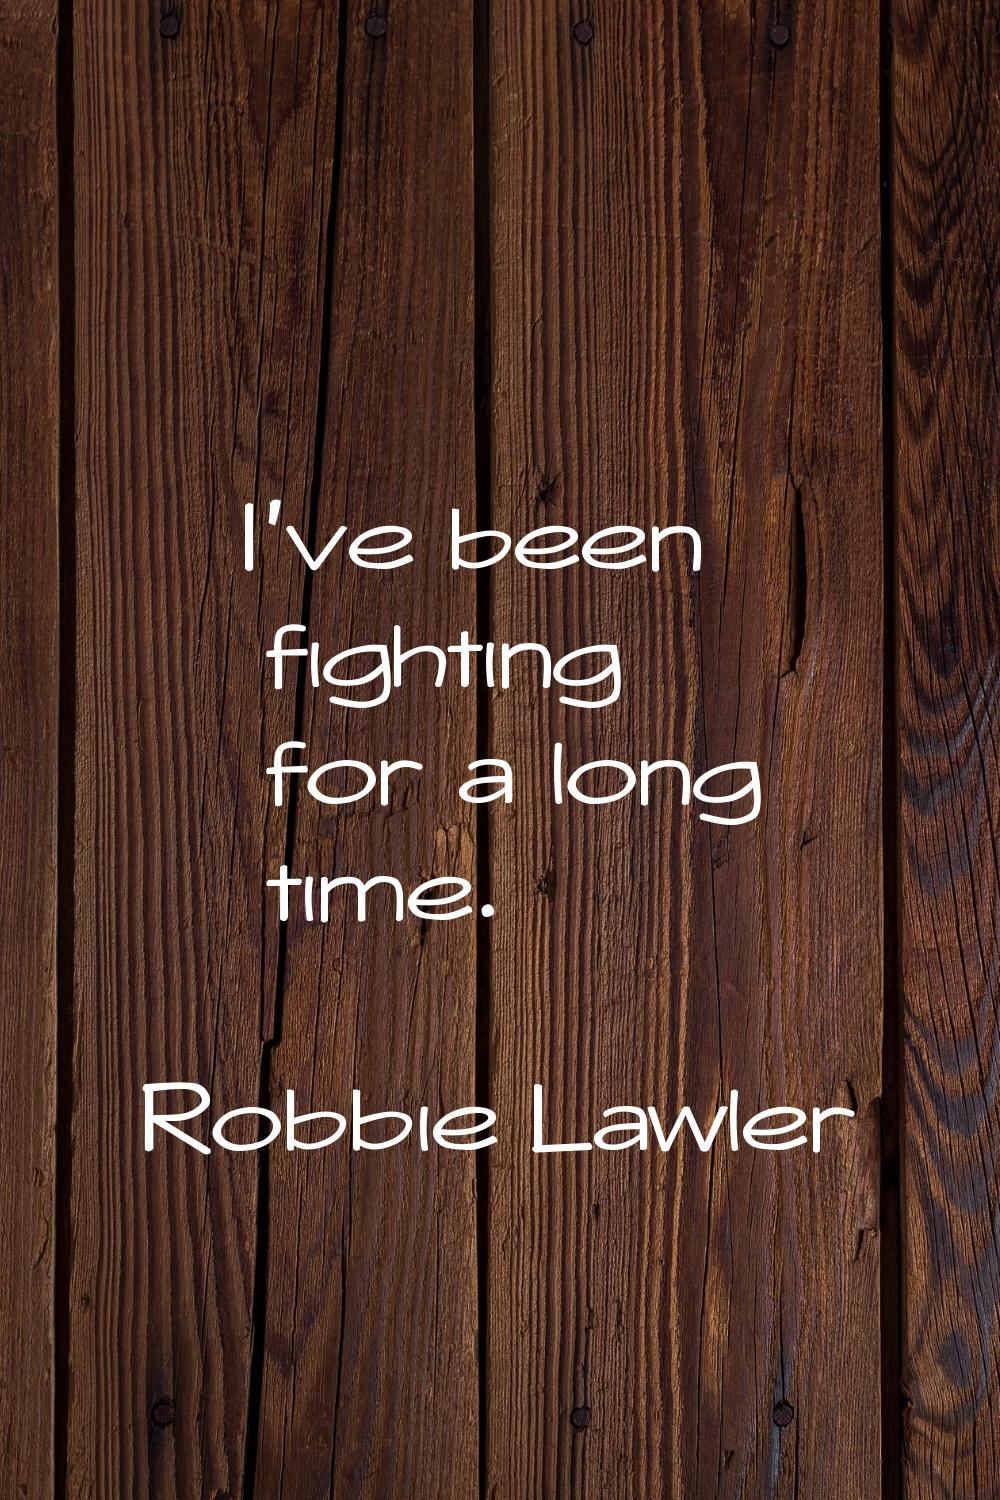 I've been fighting for a long time.